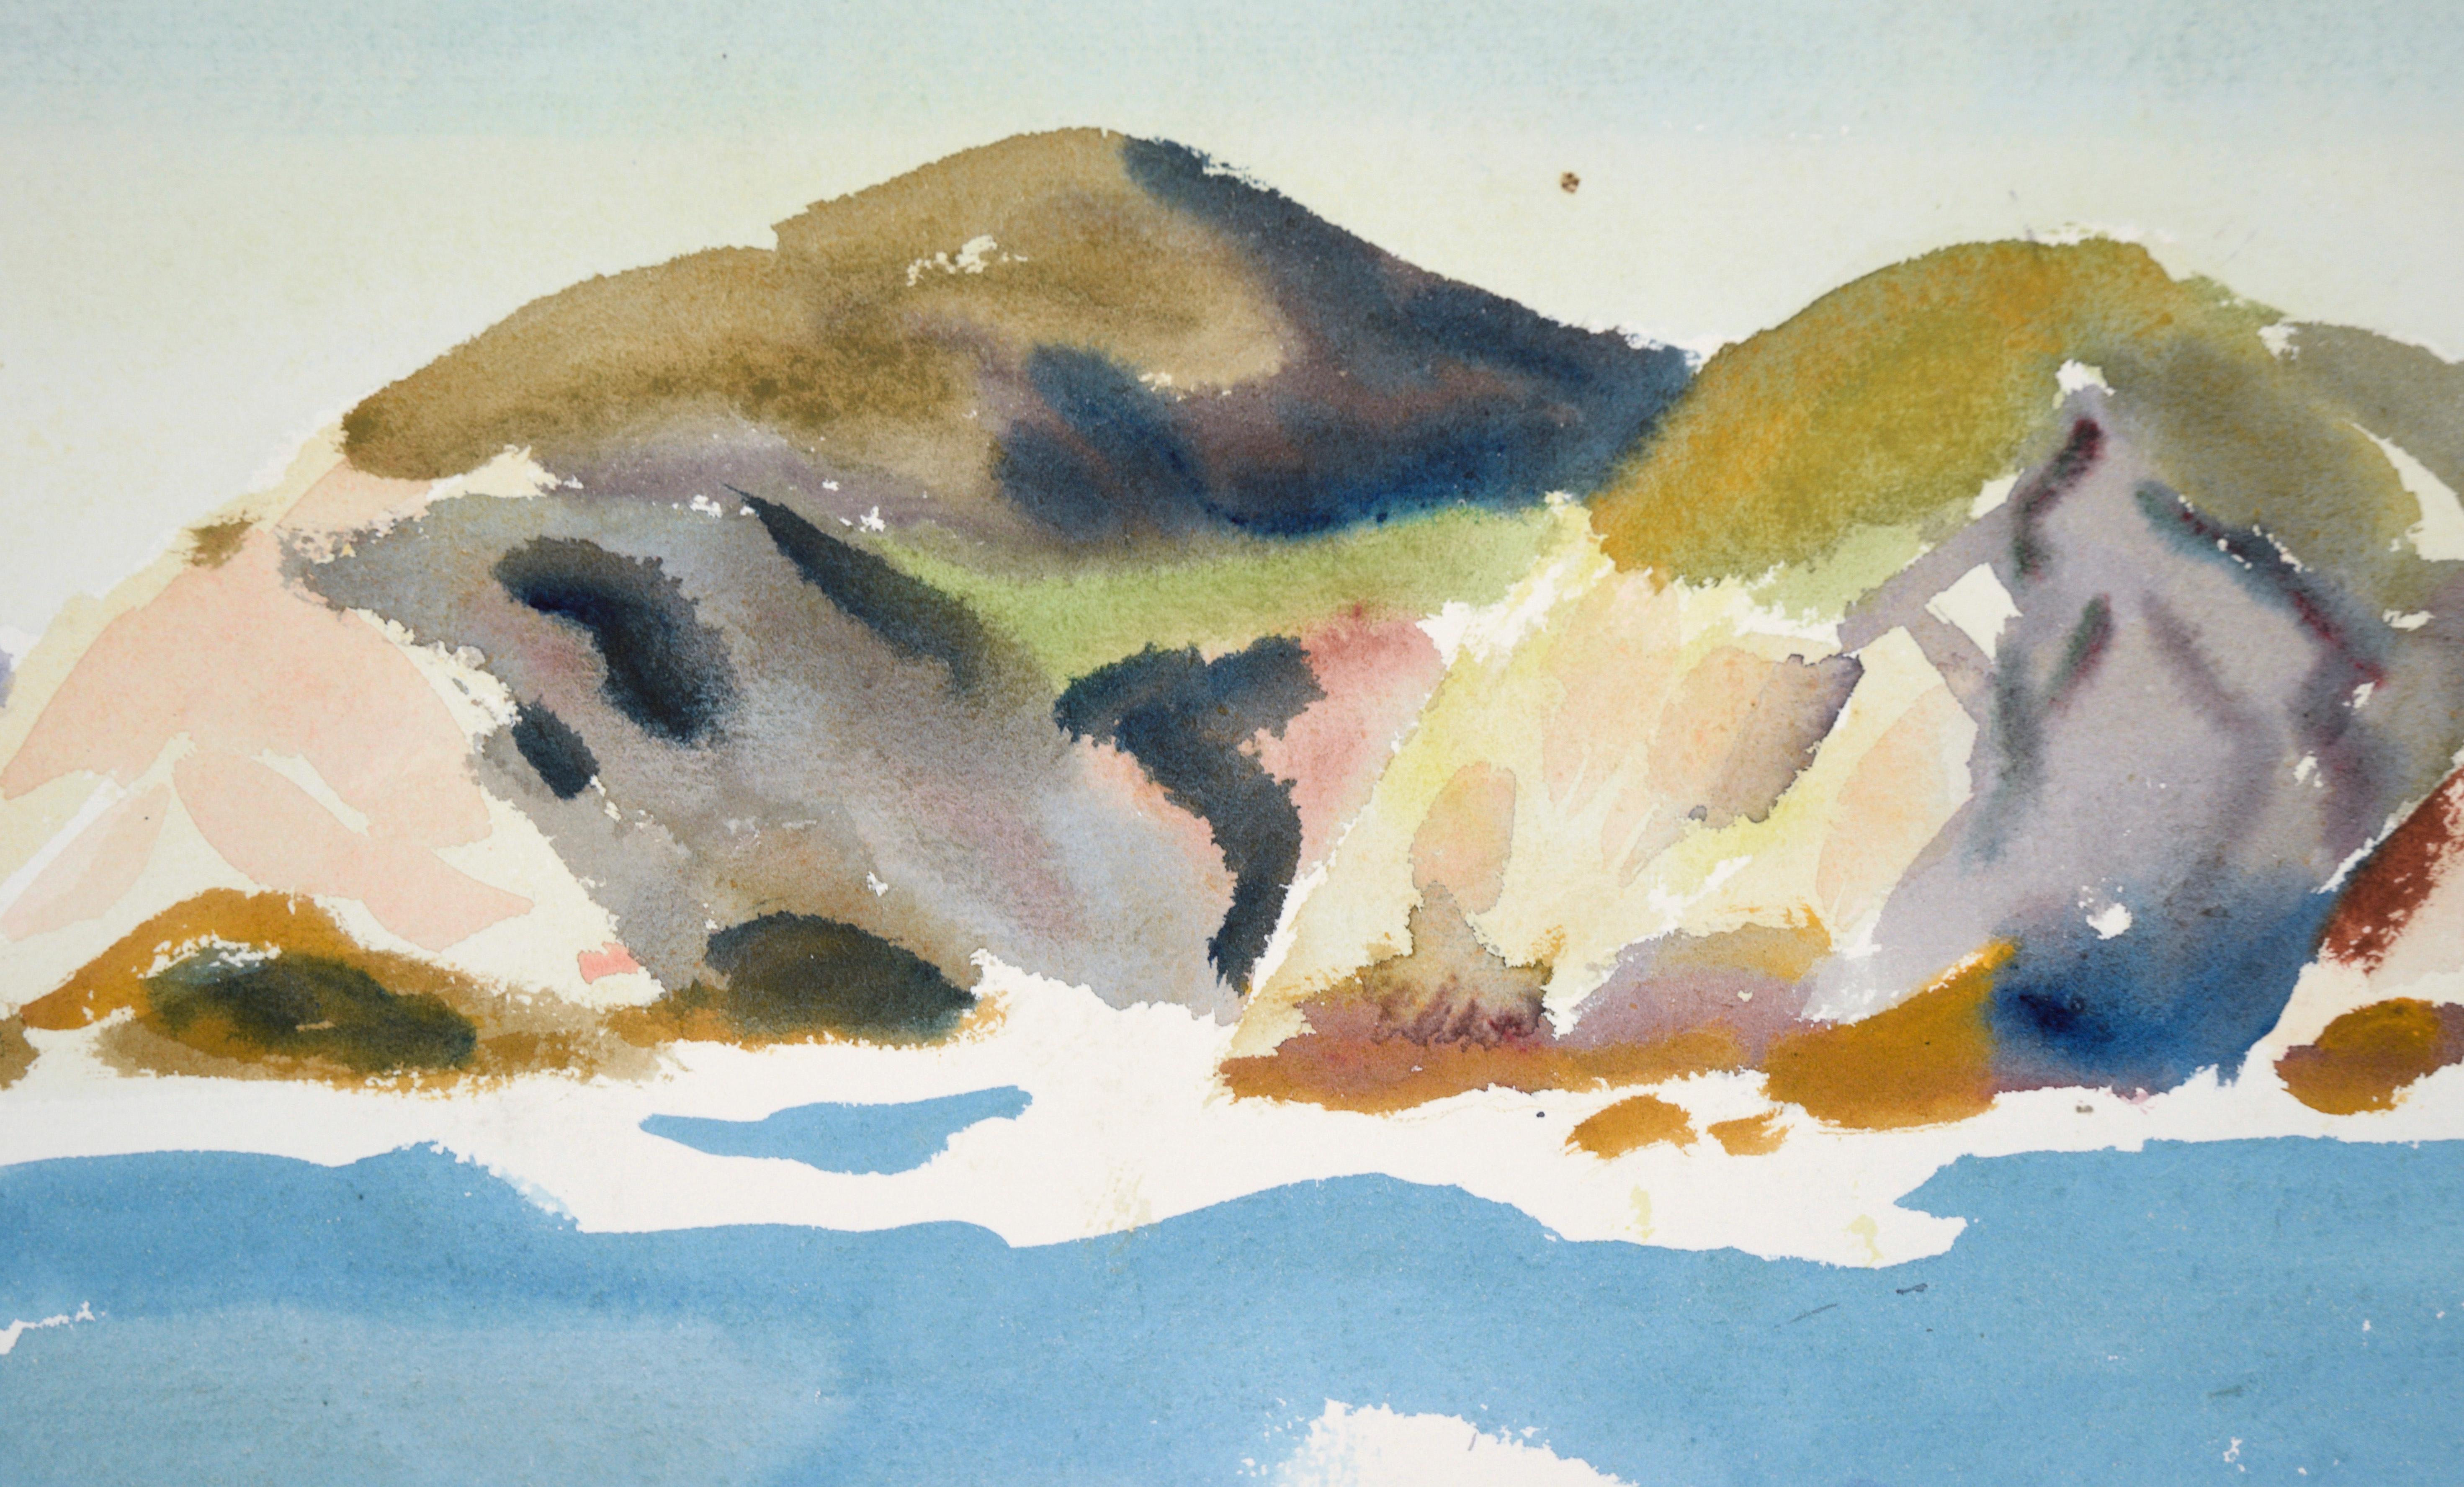 Big Sur Coast Landscape in Watercolor on Paper - American Impressionist Art by Paul Dougherty